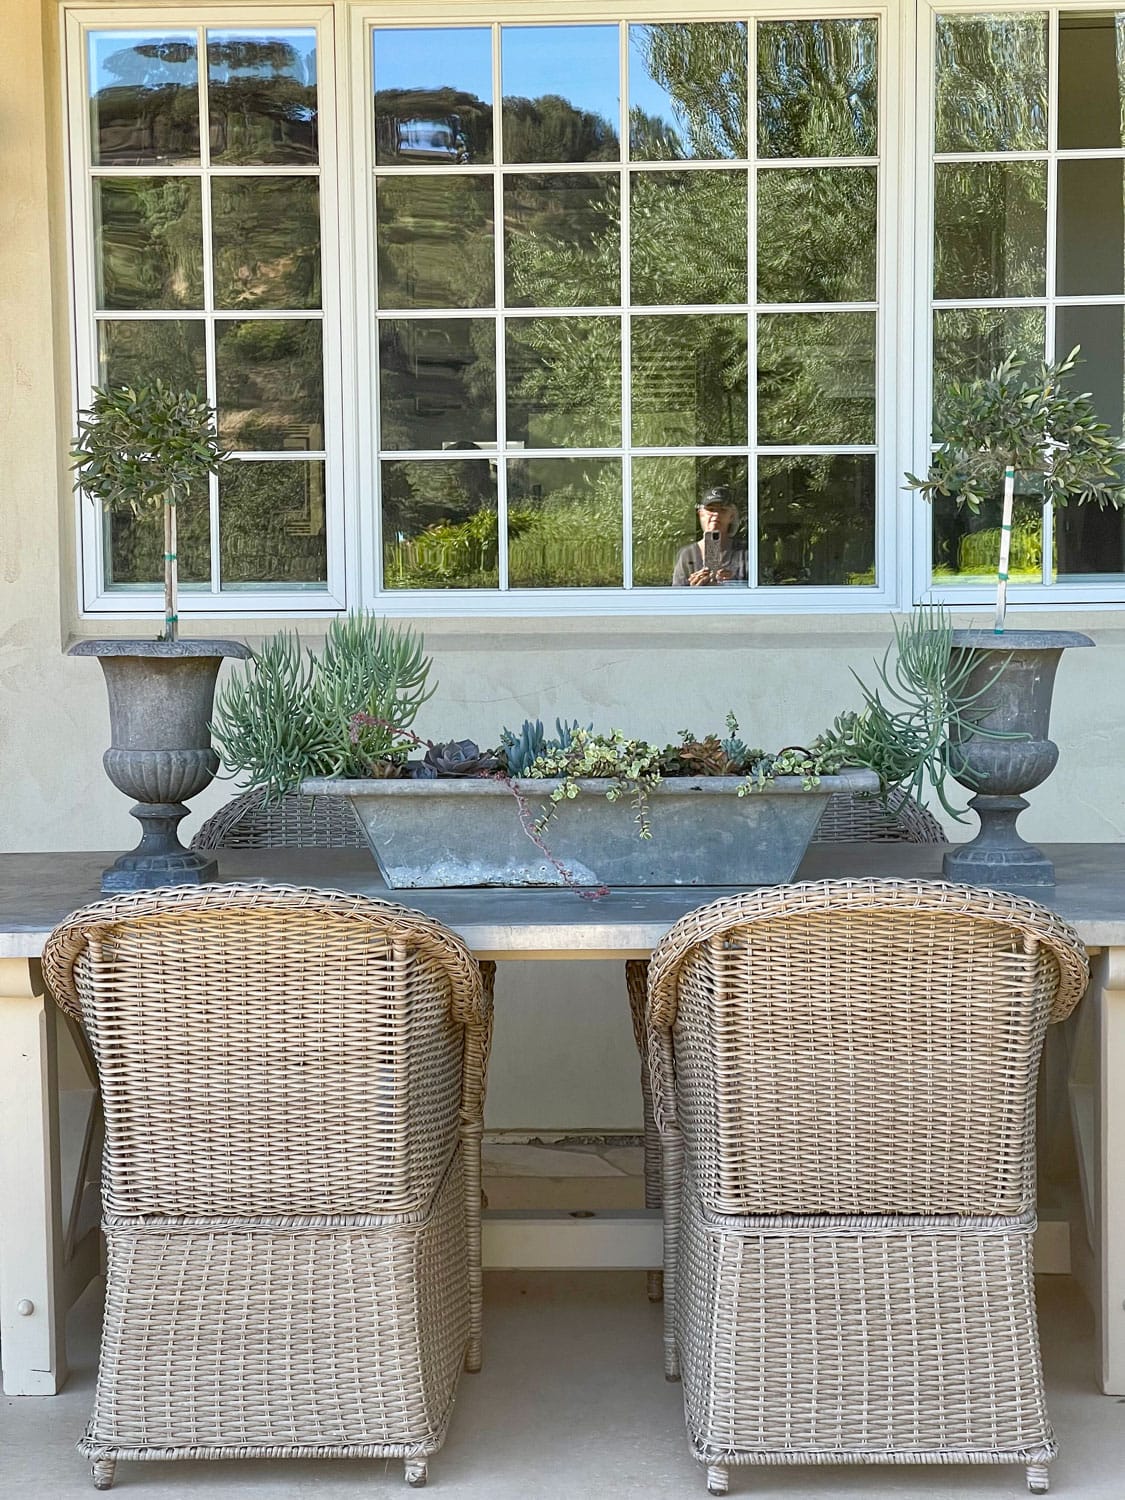 Zinc Outdoor Table and kouboo chairs-cindy hattersley design